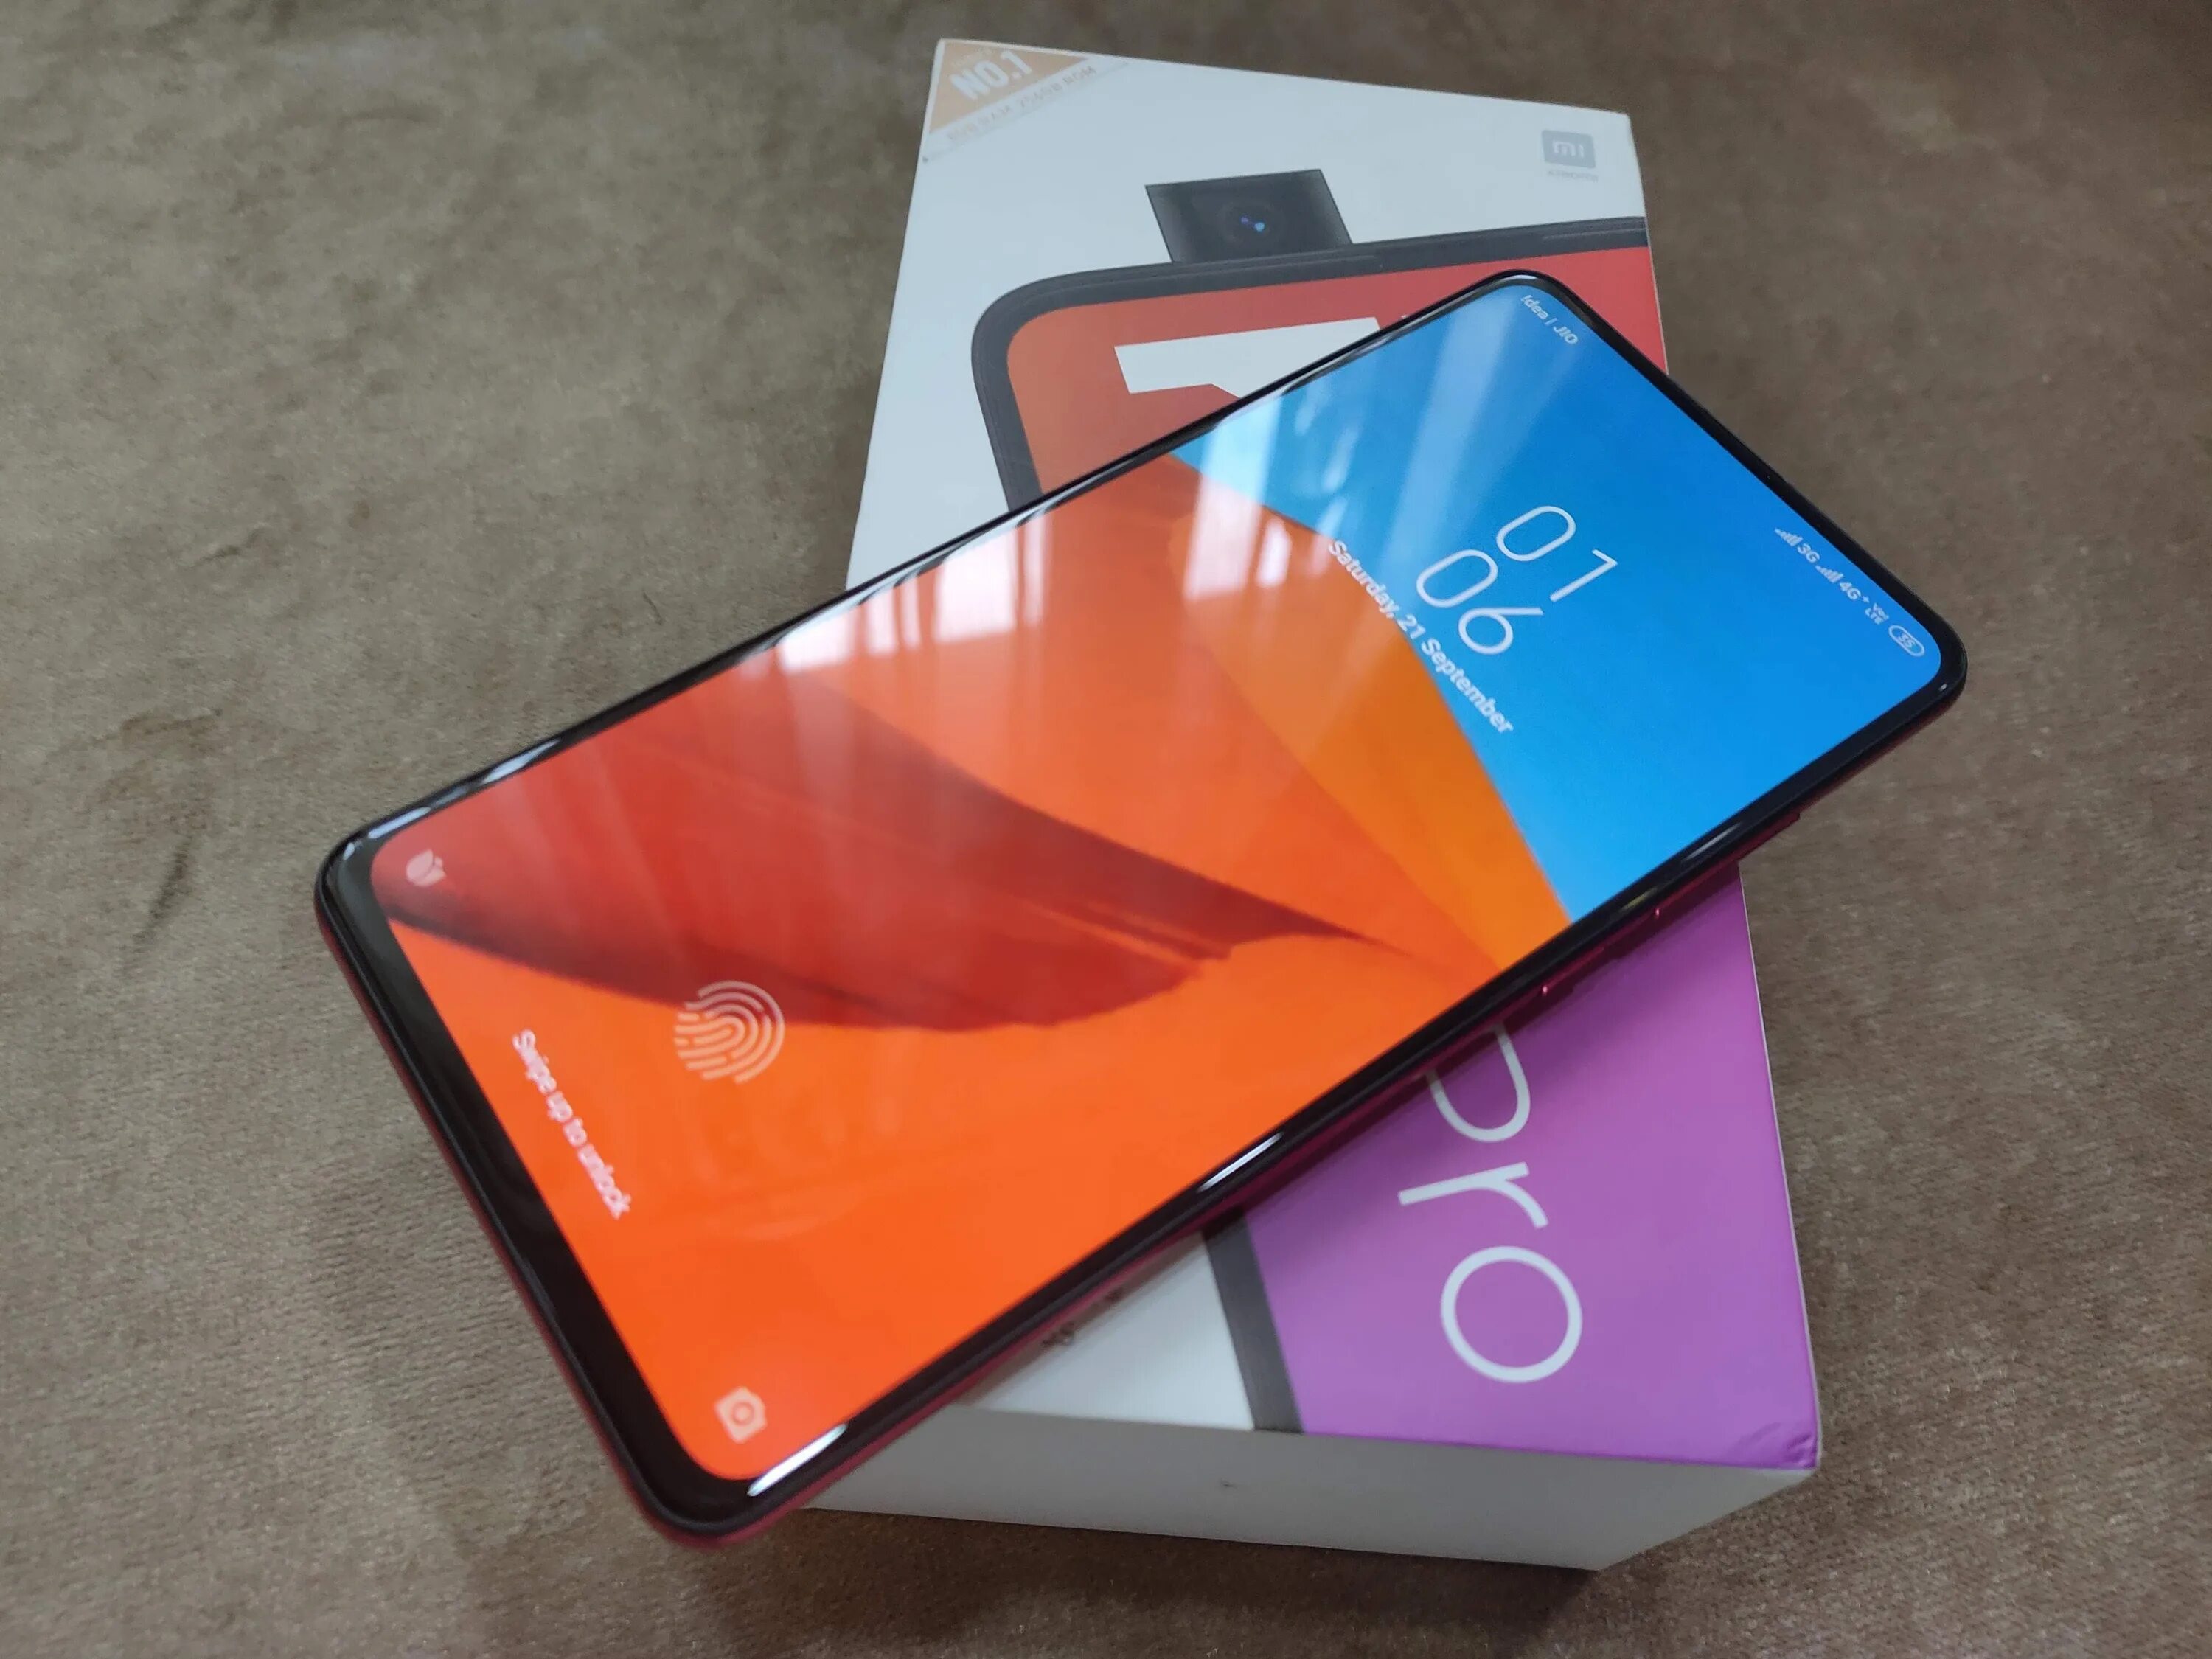 Redmi Note 11 Pro. Redmi Note 20 Pro. Xiaomi Note 20. Xiaomi Redmi Note 11s Pro. Note 7 note 11